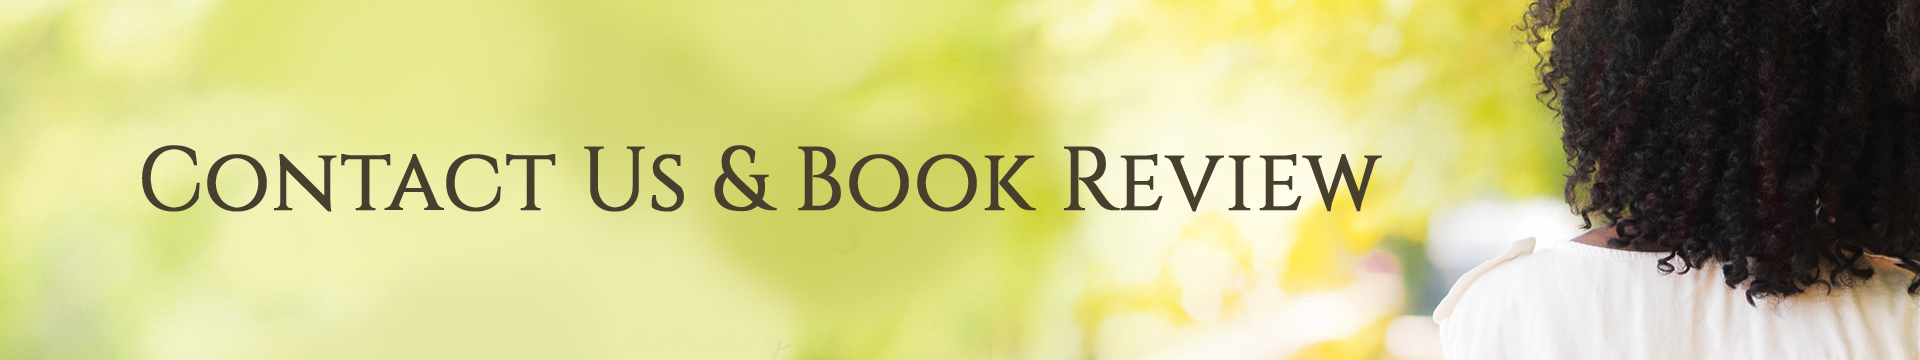 Contact Us & Book Review